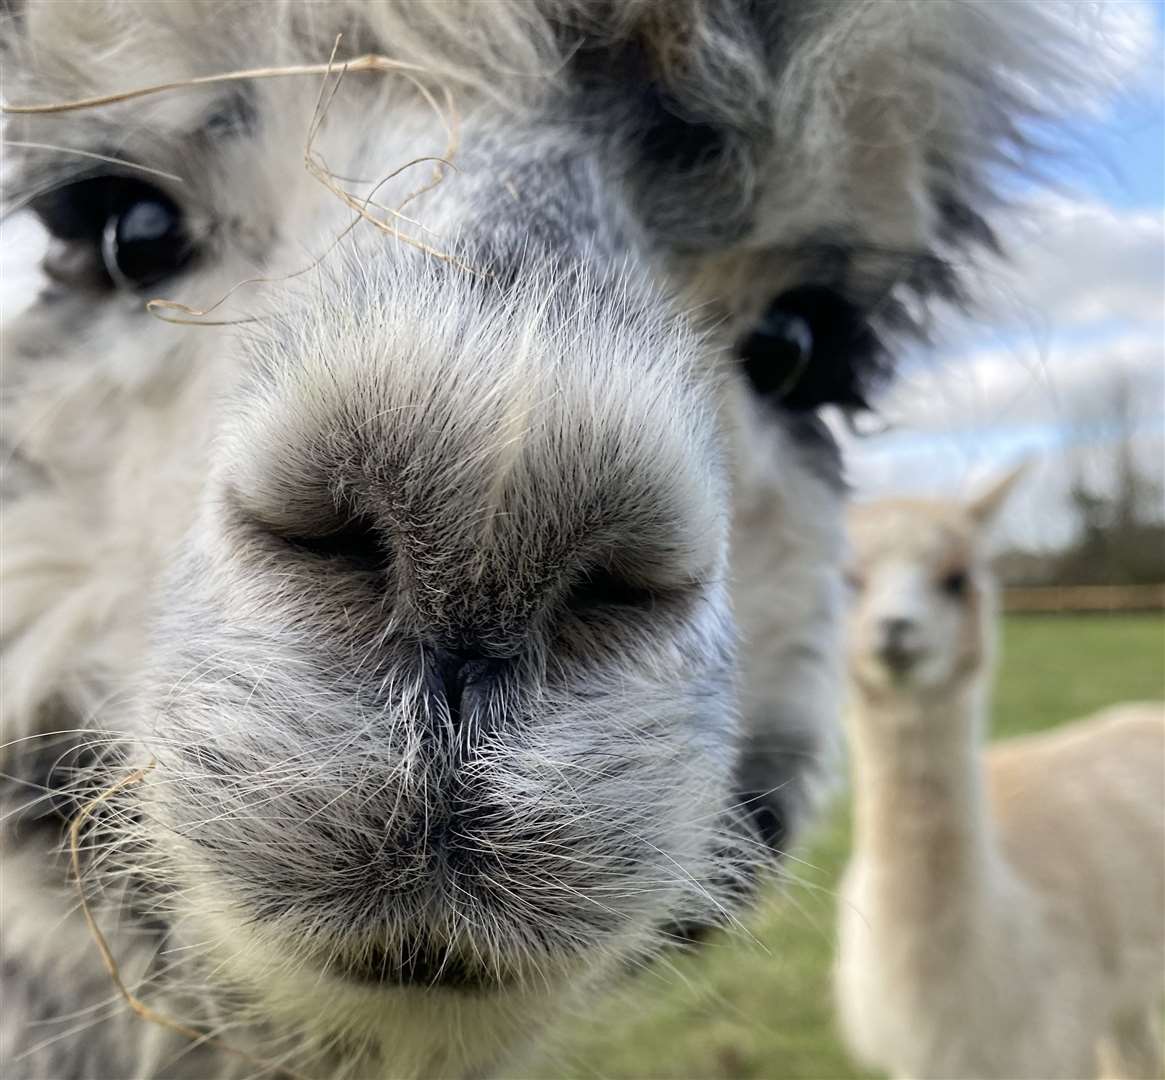 Alpacas are gentle, curious creatures and very sociable